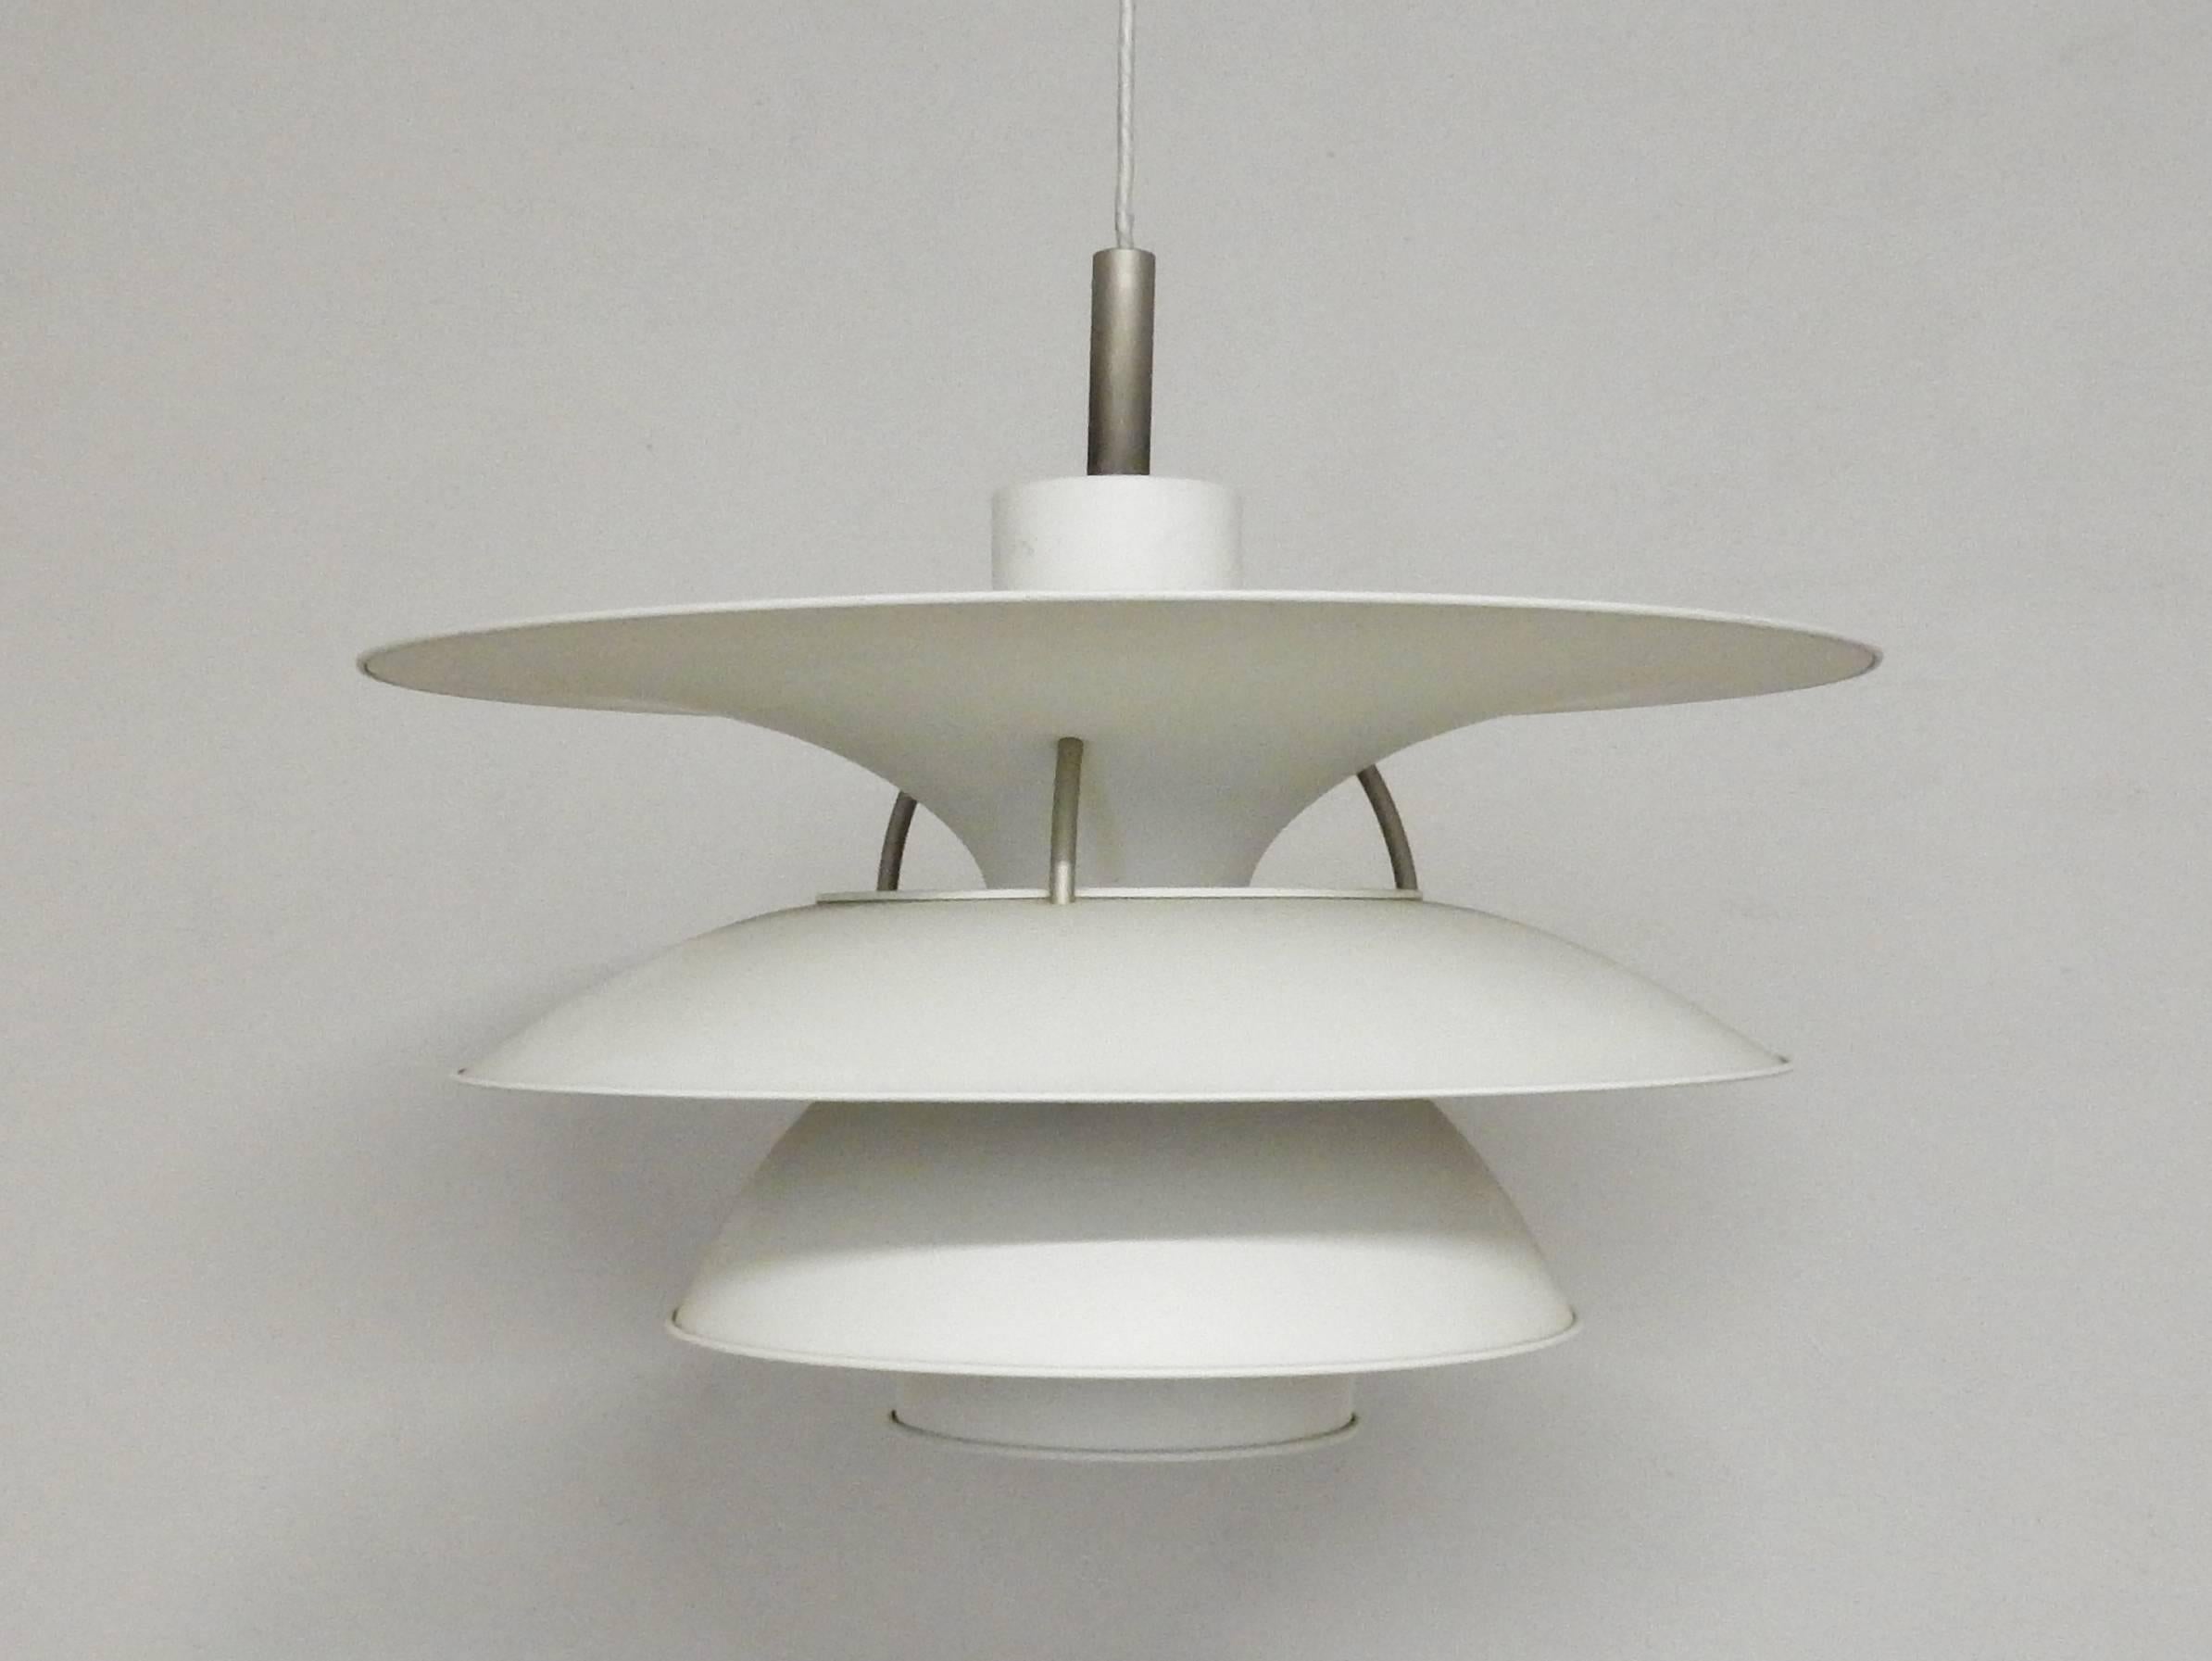 With a diameter of 65 cm this is the largest version of this PH-model.

This pendant light is a design by Poul Henningsen with Ebbe Christensen and Sophus Frandsen. With of course Poul Henningsen being the father of the PH-lights.

Measures: